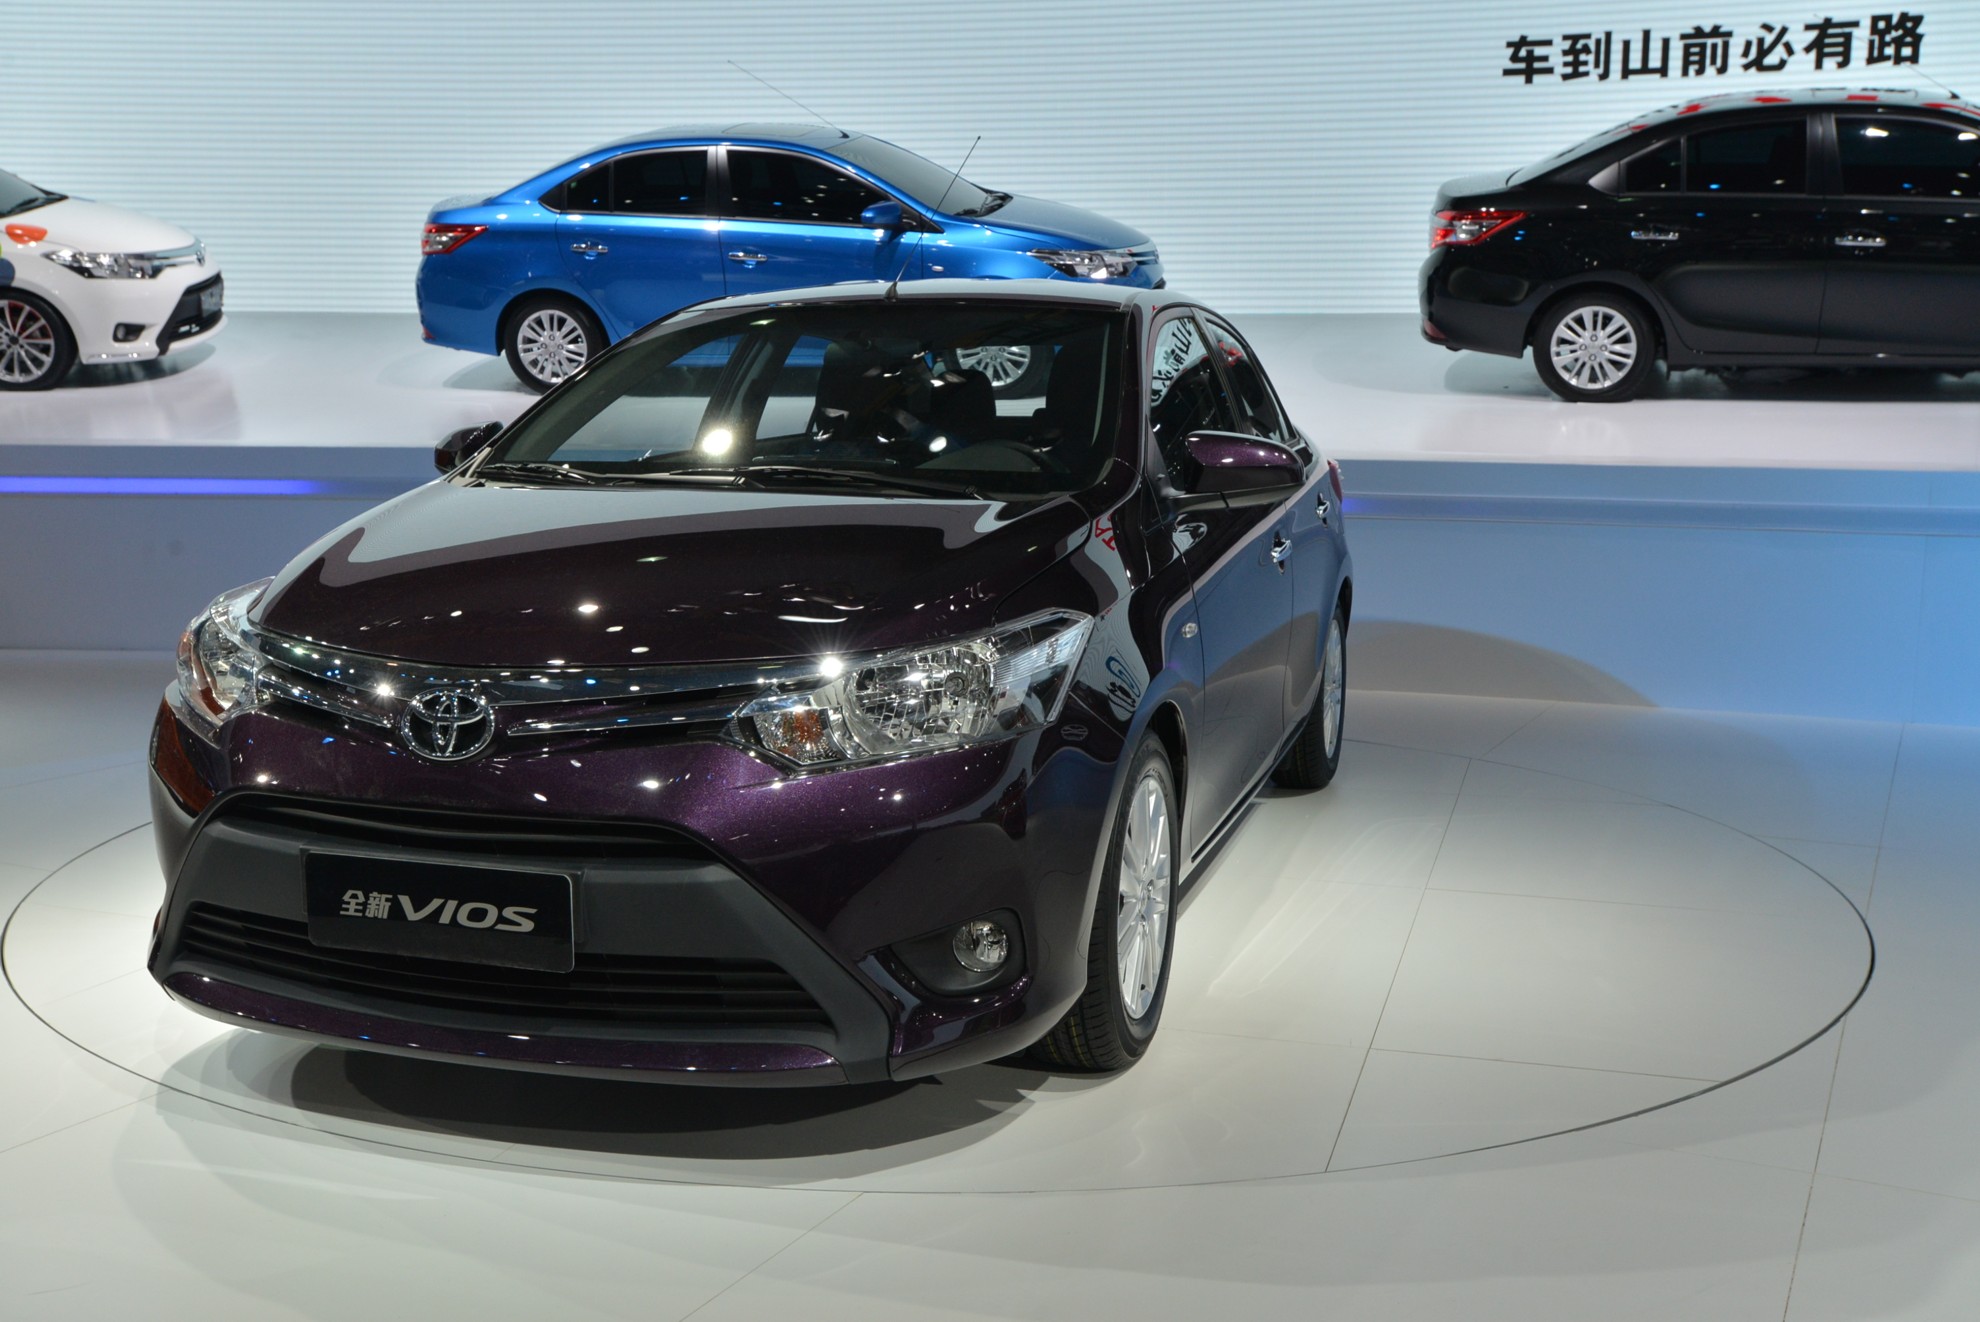 Toyota Vios 2015: Review, Amazing Pictures and Images - Look at the car